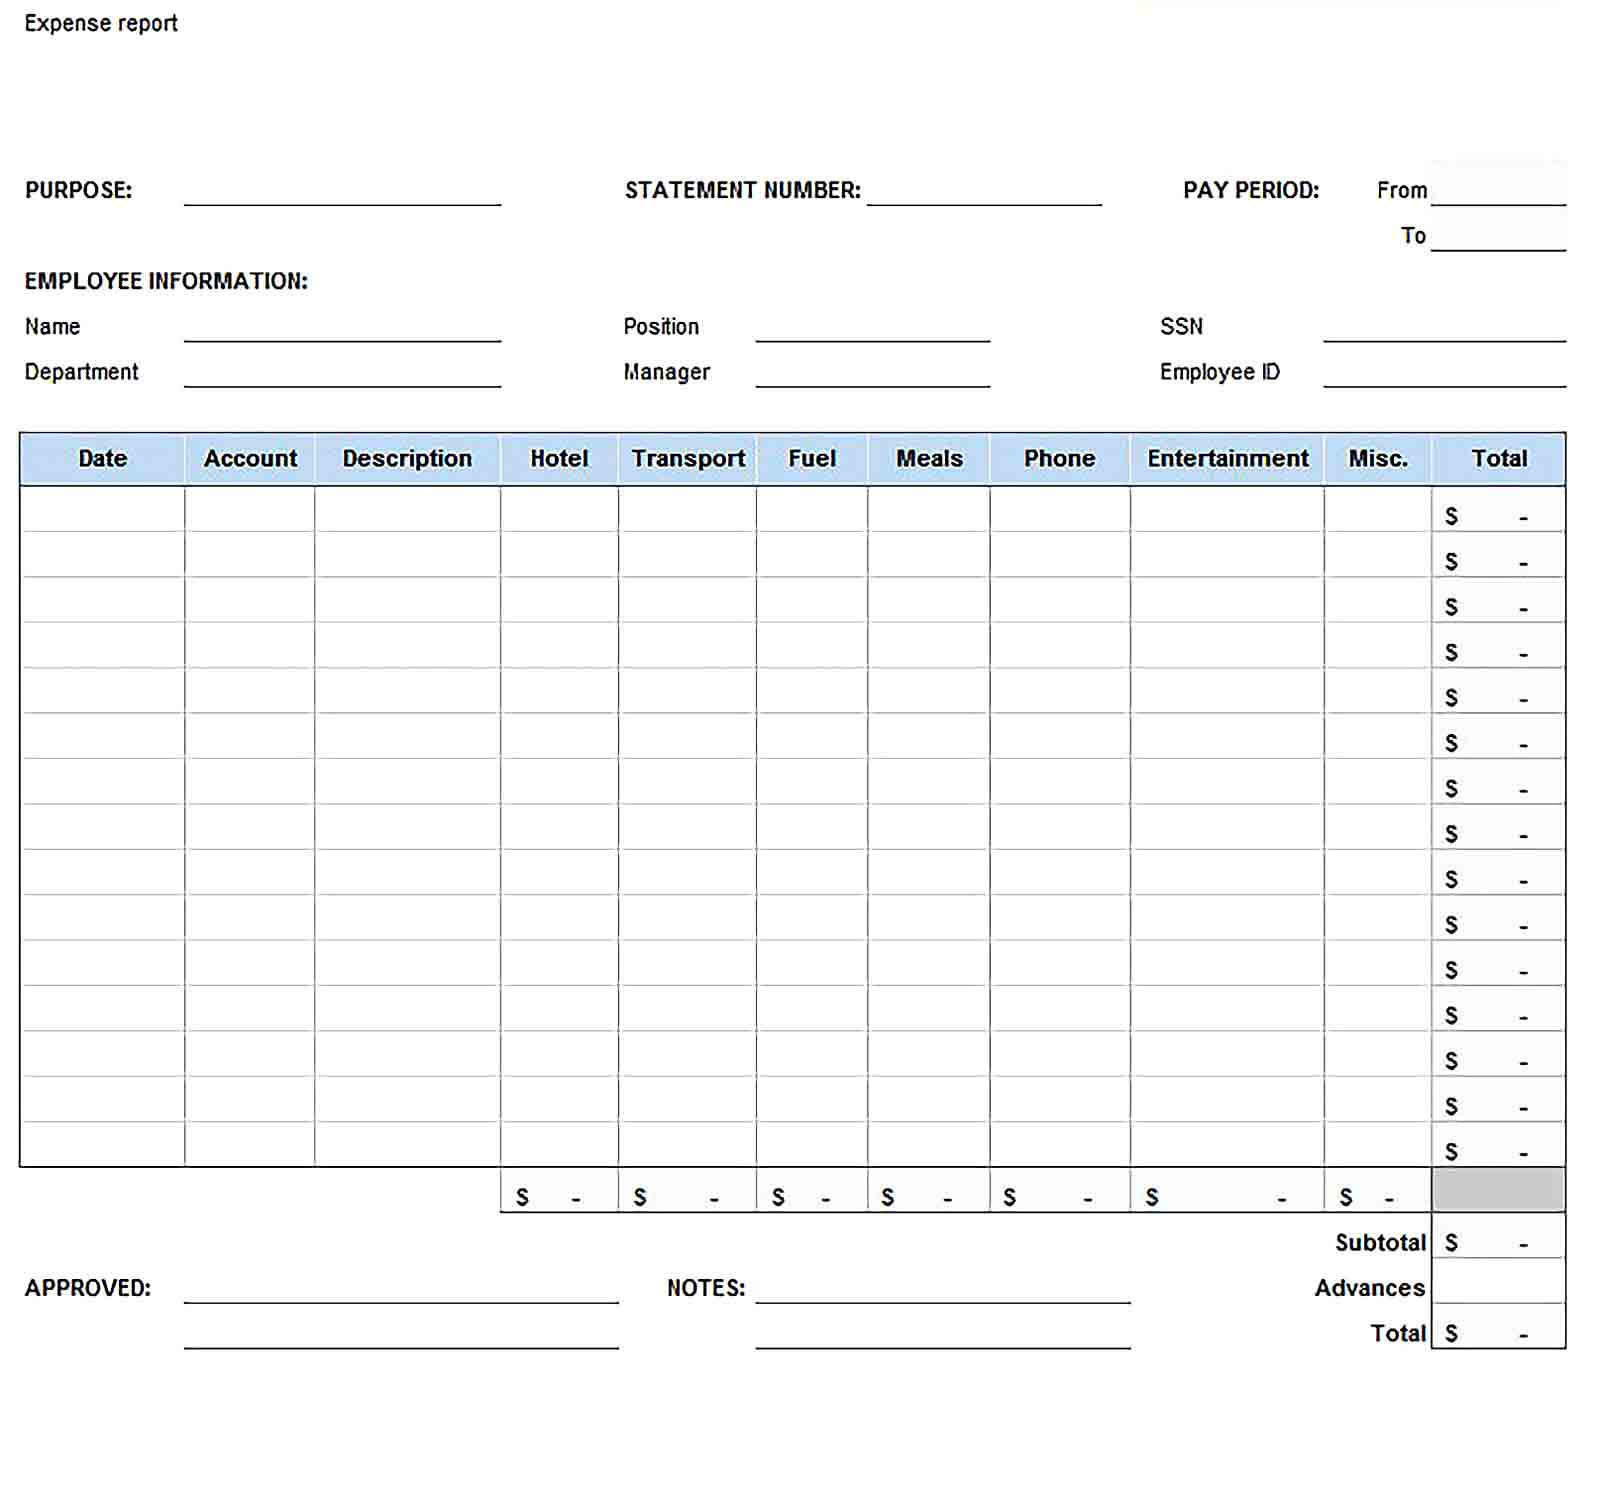 Sample expense report template excel